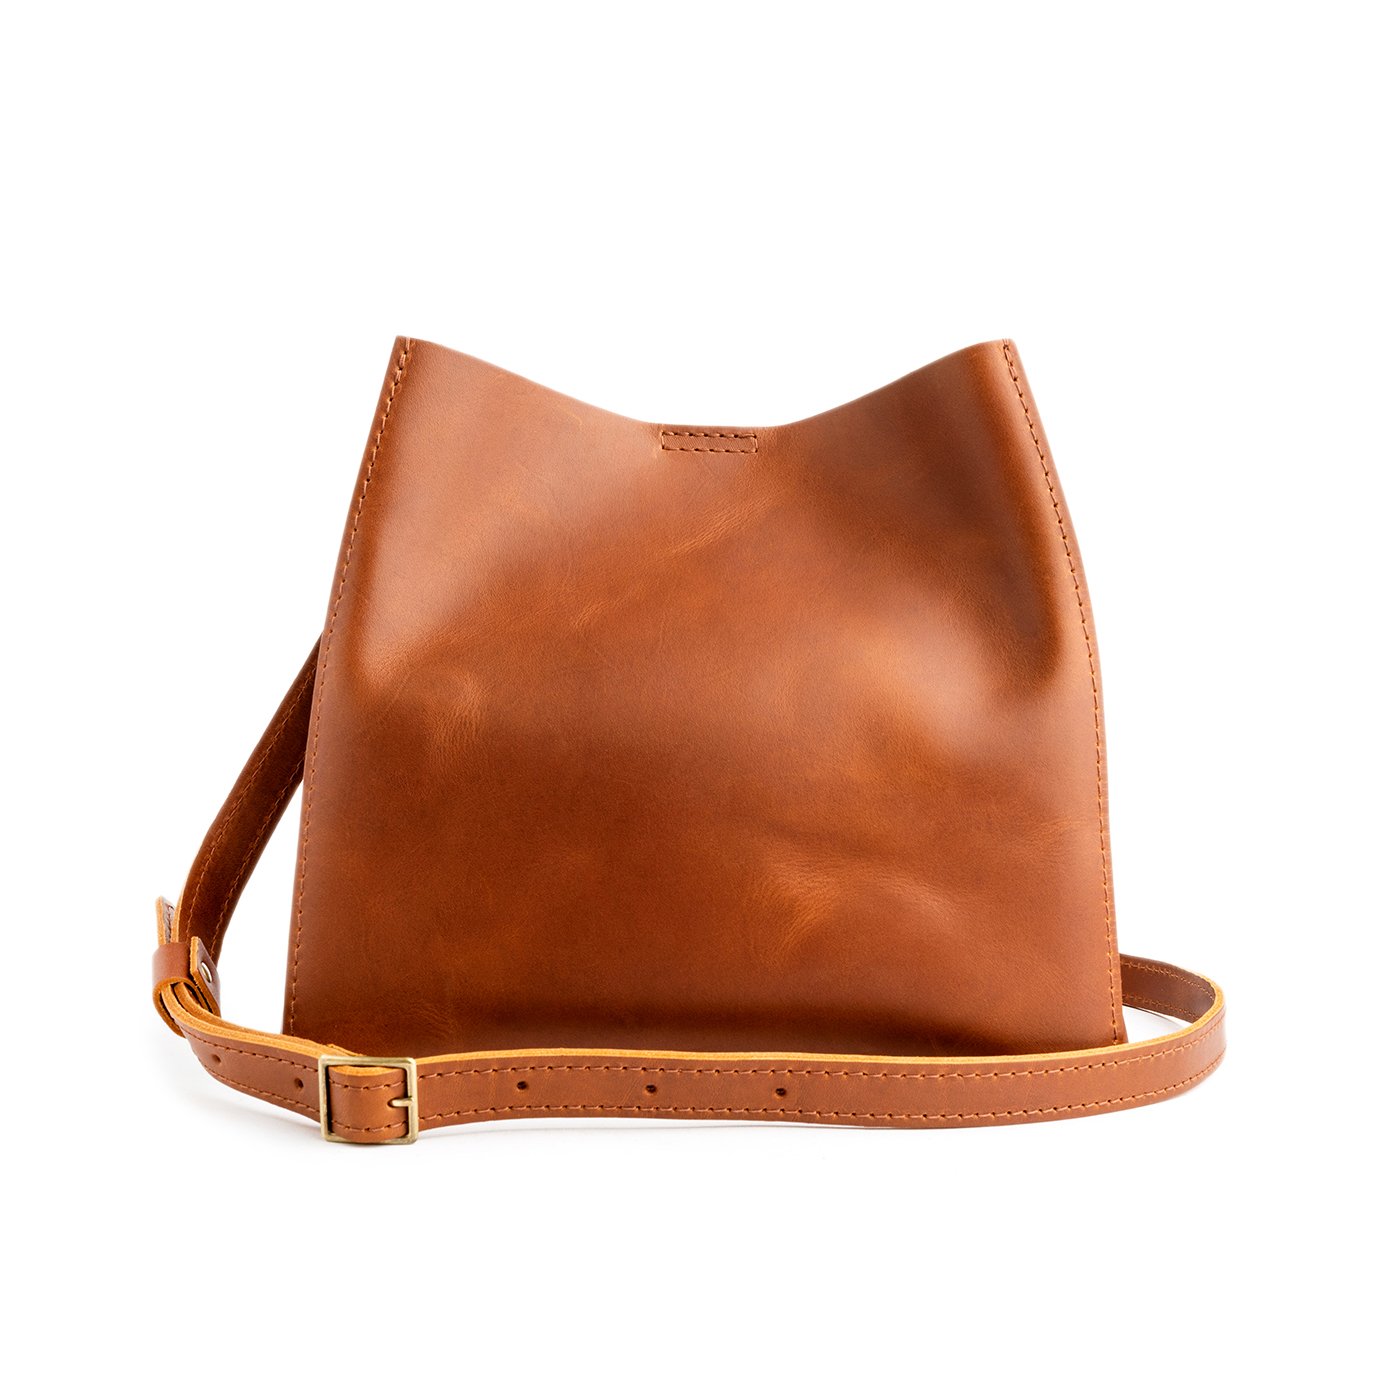 Almost Perfect' Butterfly Bucket Bag, Portland Leather